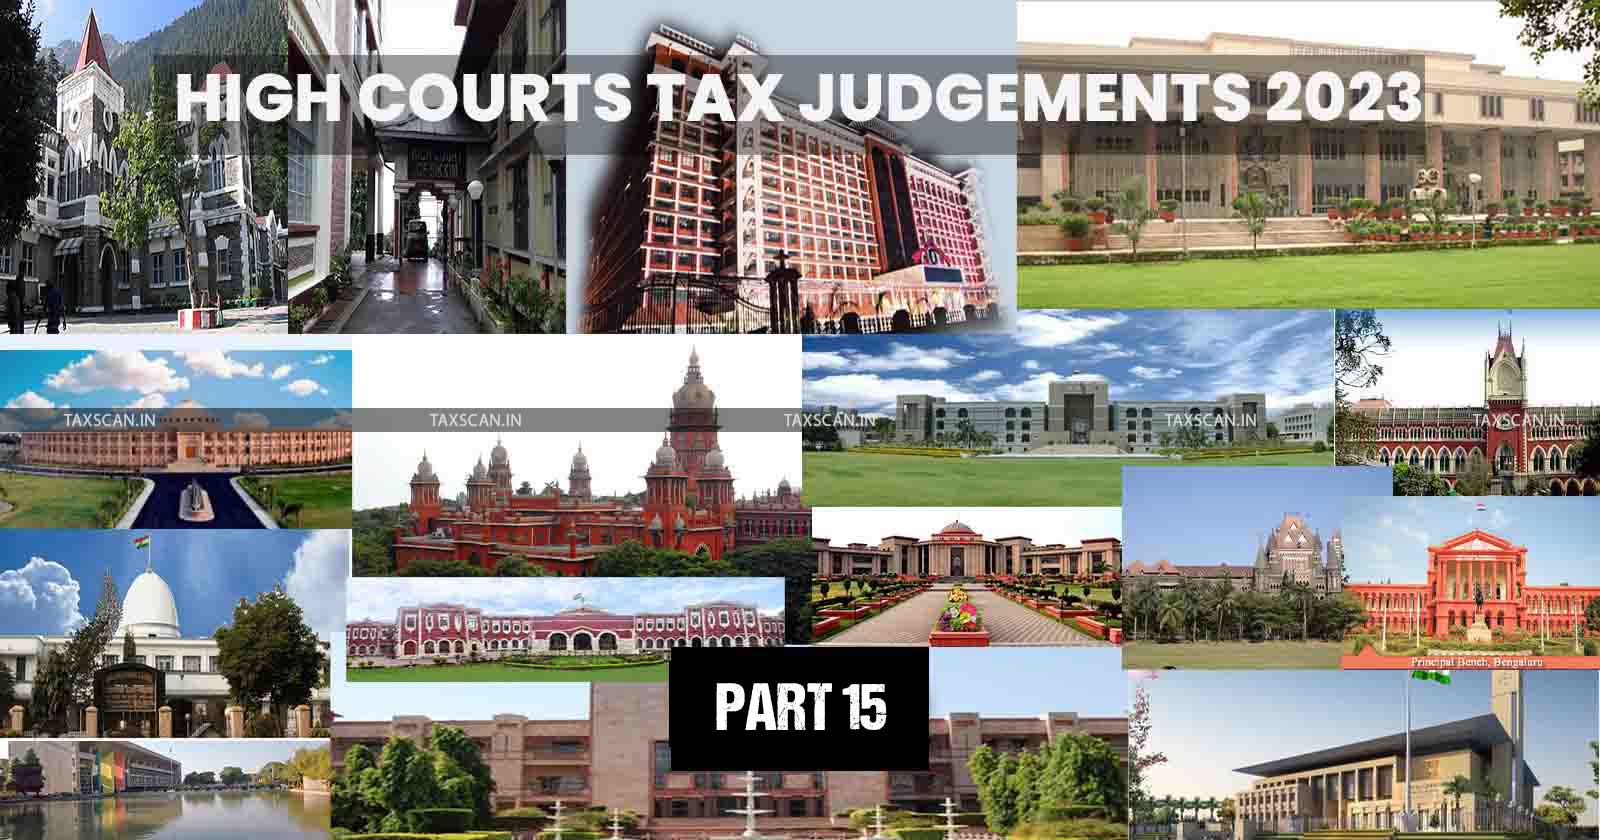 High Courts Annual Digest 2023 - Annual Digest 2023 - Tax Judgments of High Courts - Taxscan Annual Digest - hc annual digest - TAXSCAN